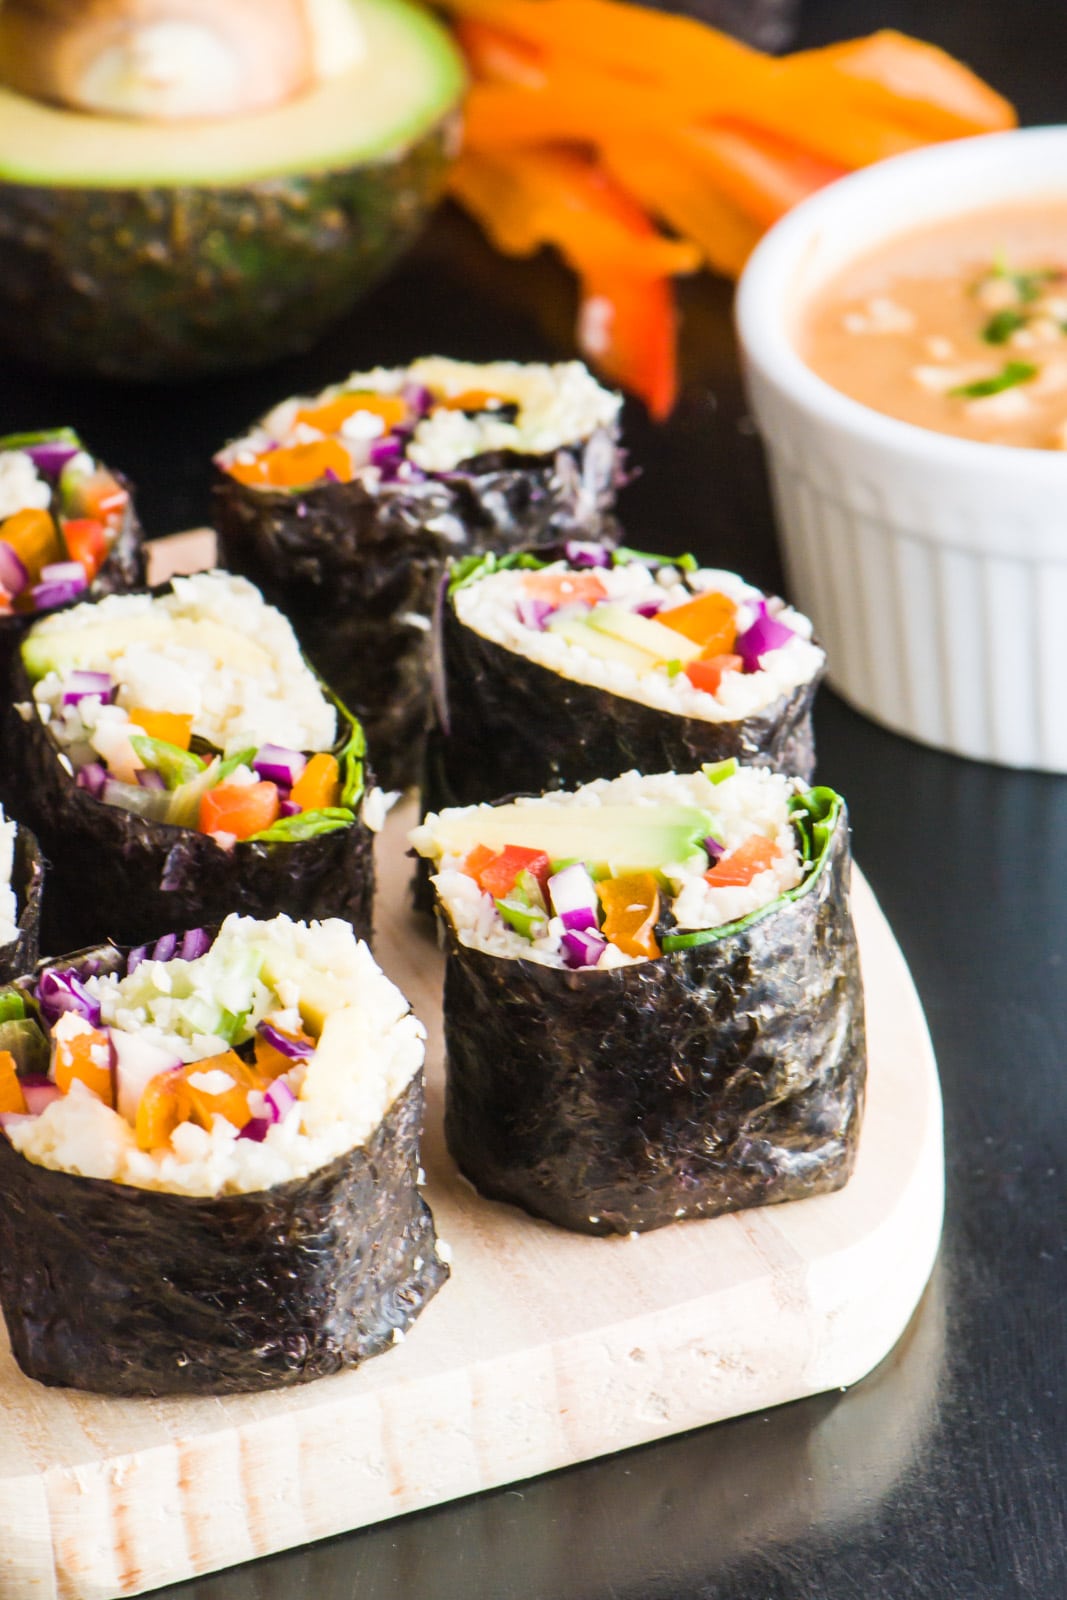 Several slices of vegan sushi sit by a bowl of spicy sweet peanut sauce.